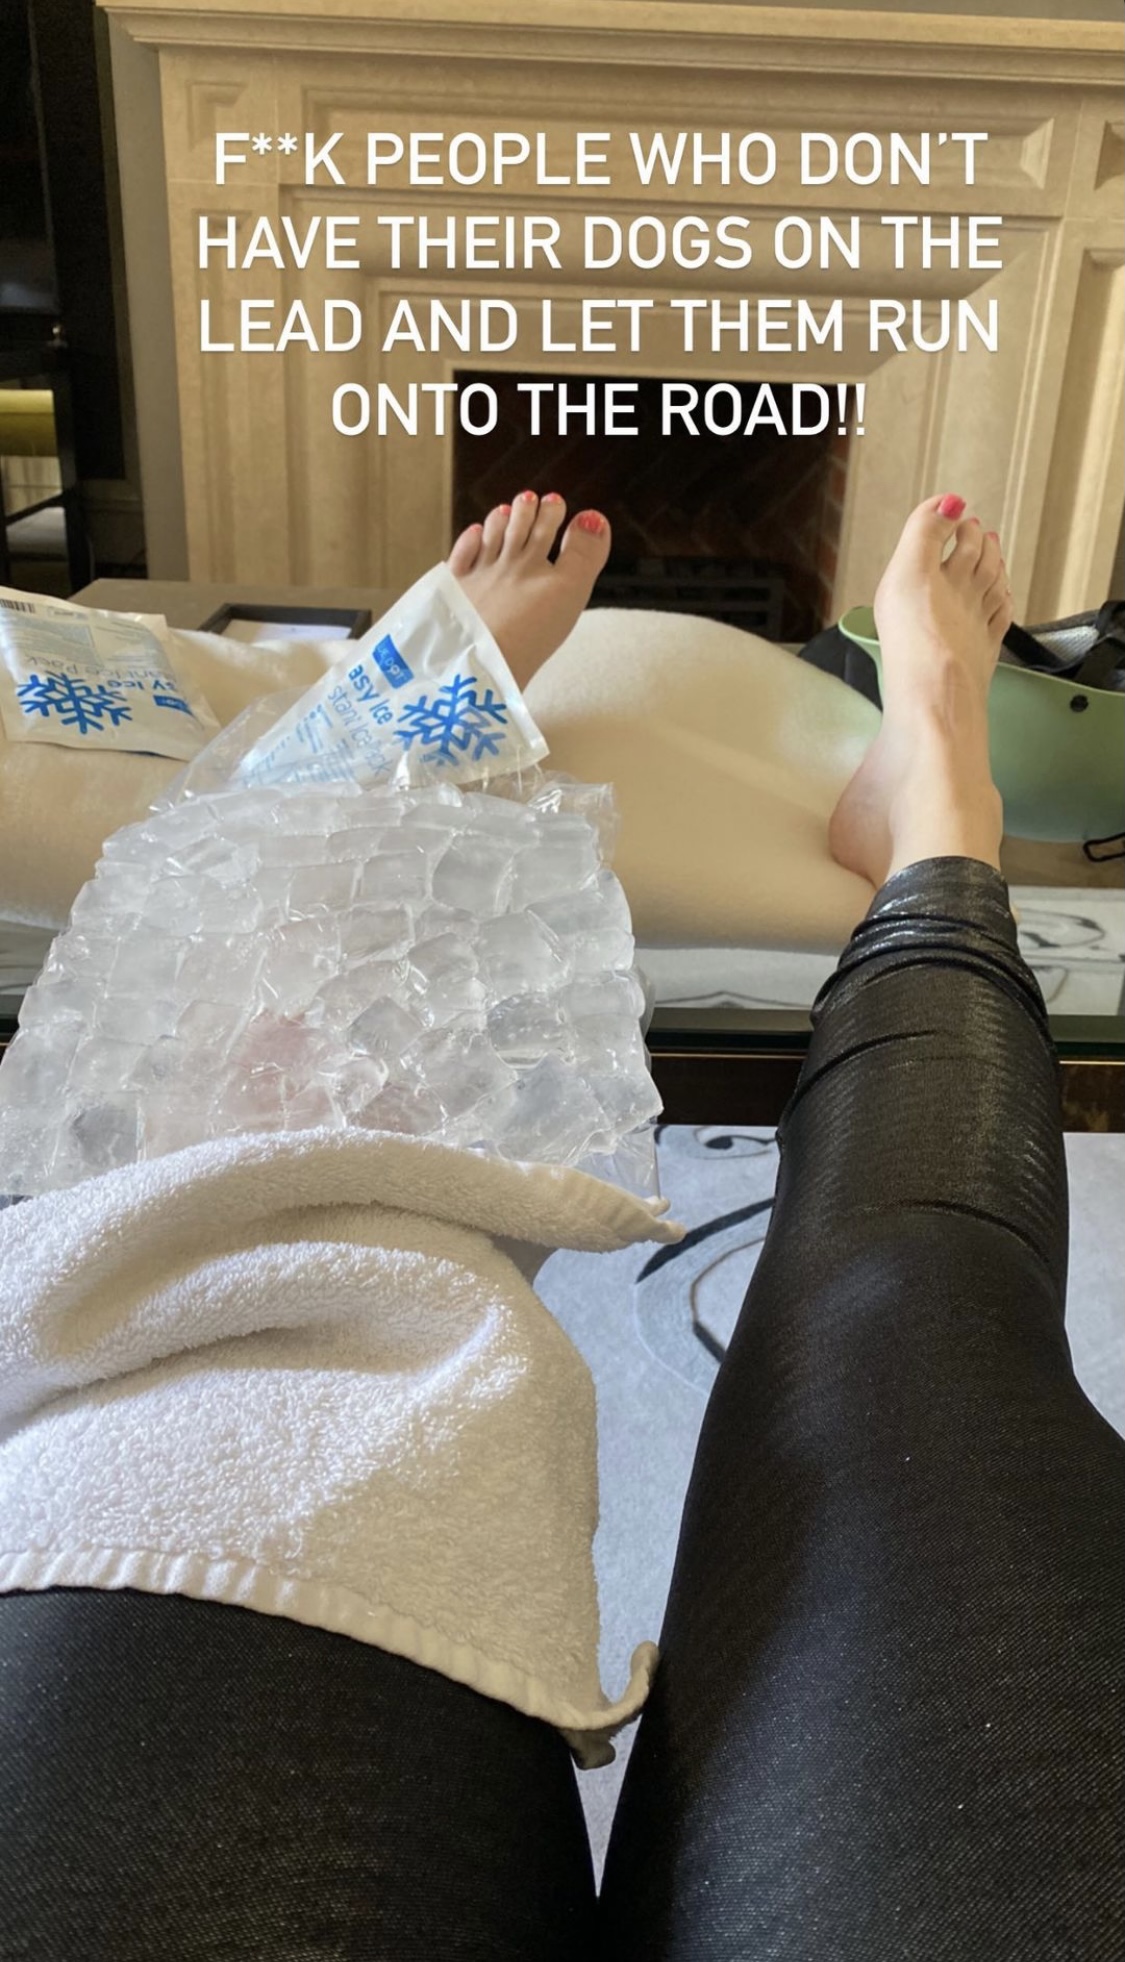 Rebel Wilson Recovers After Biking Accident With An Unleashed Dog!